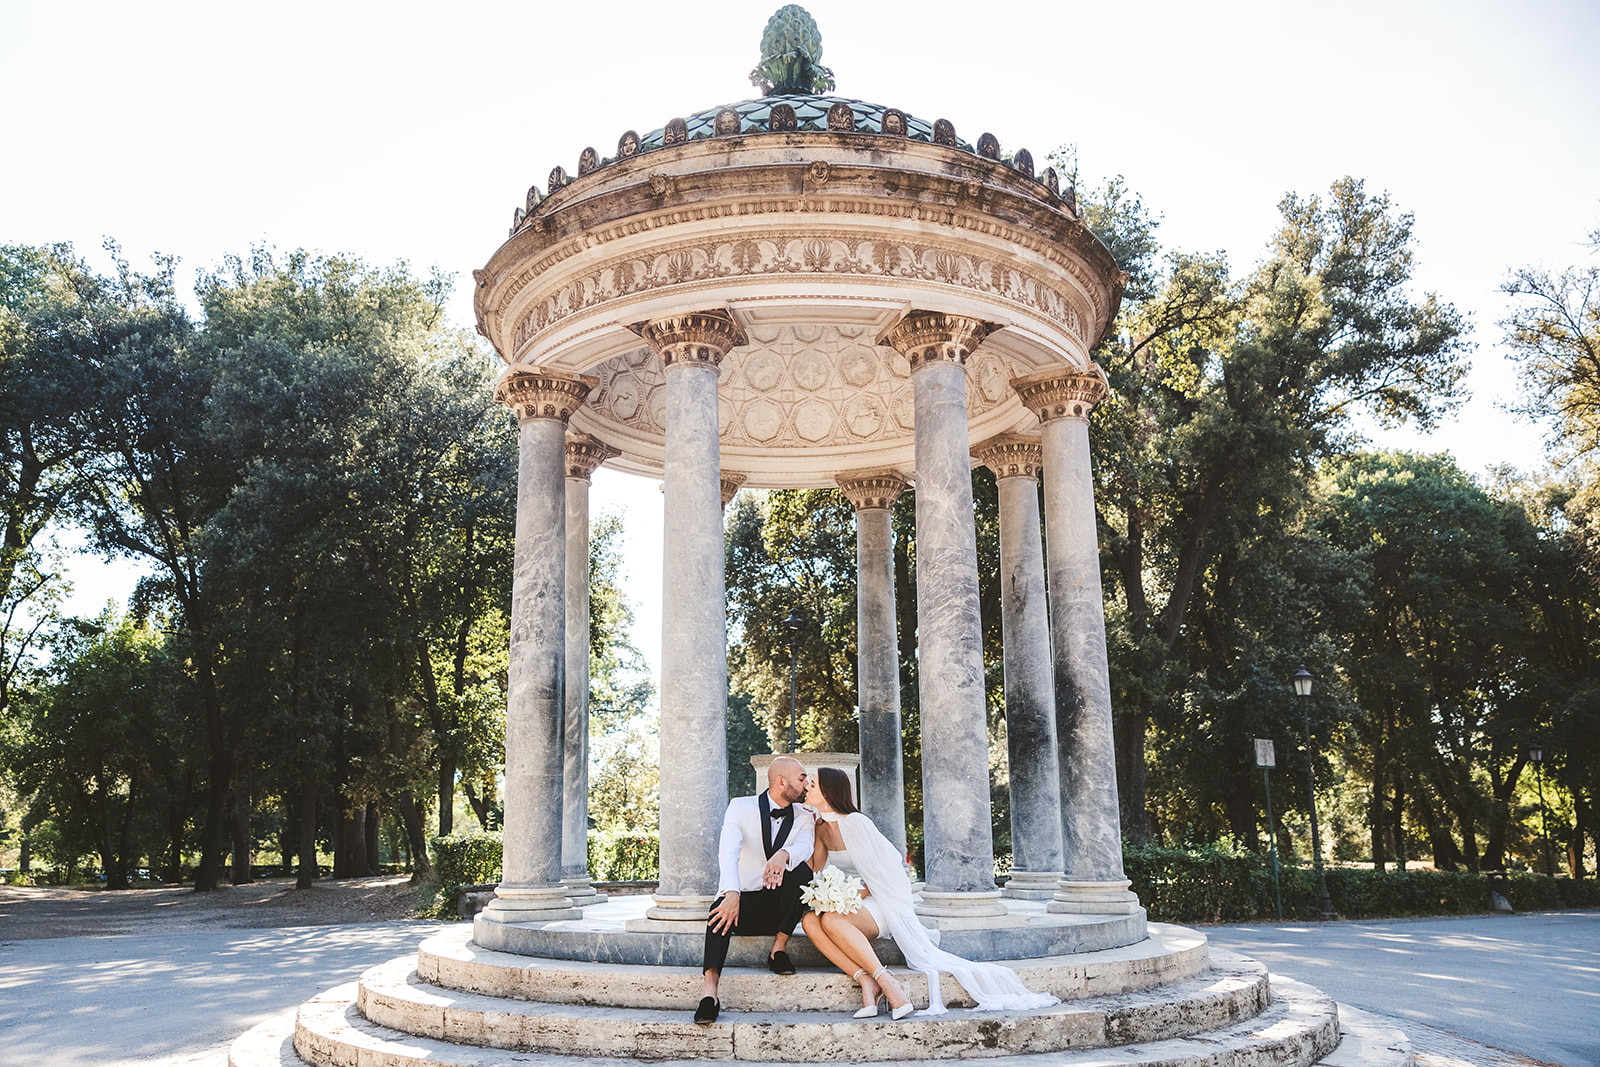 Stylish elopement in Rome